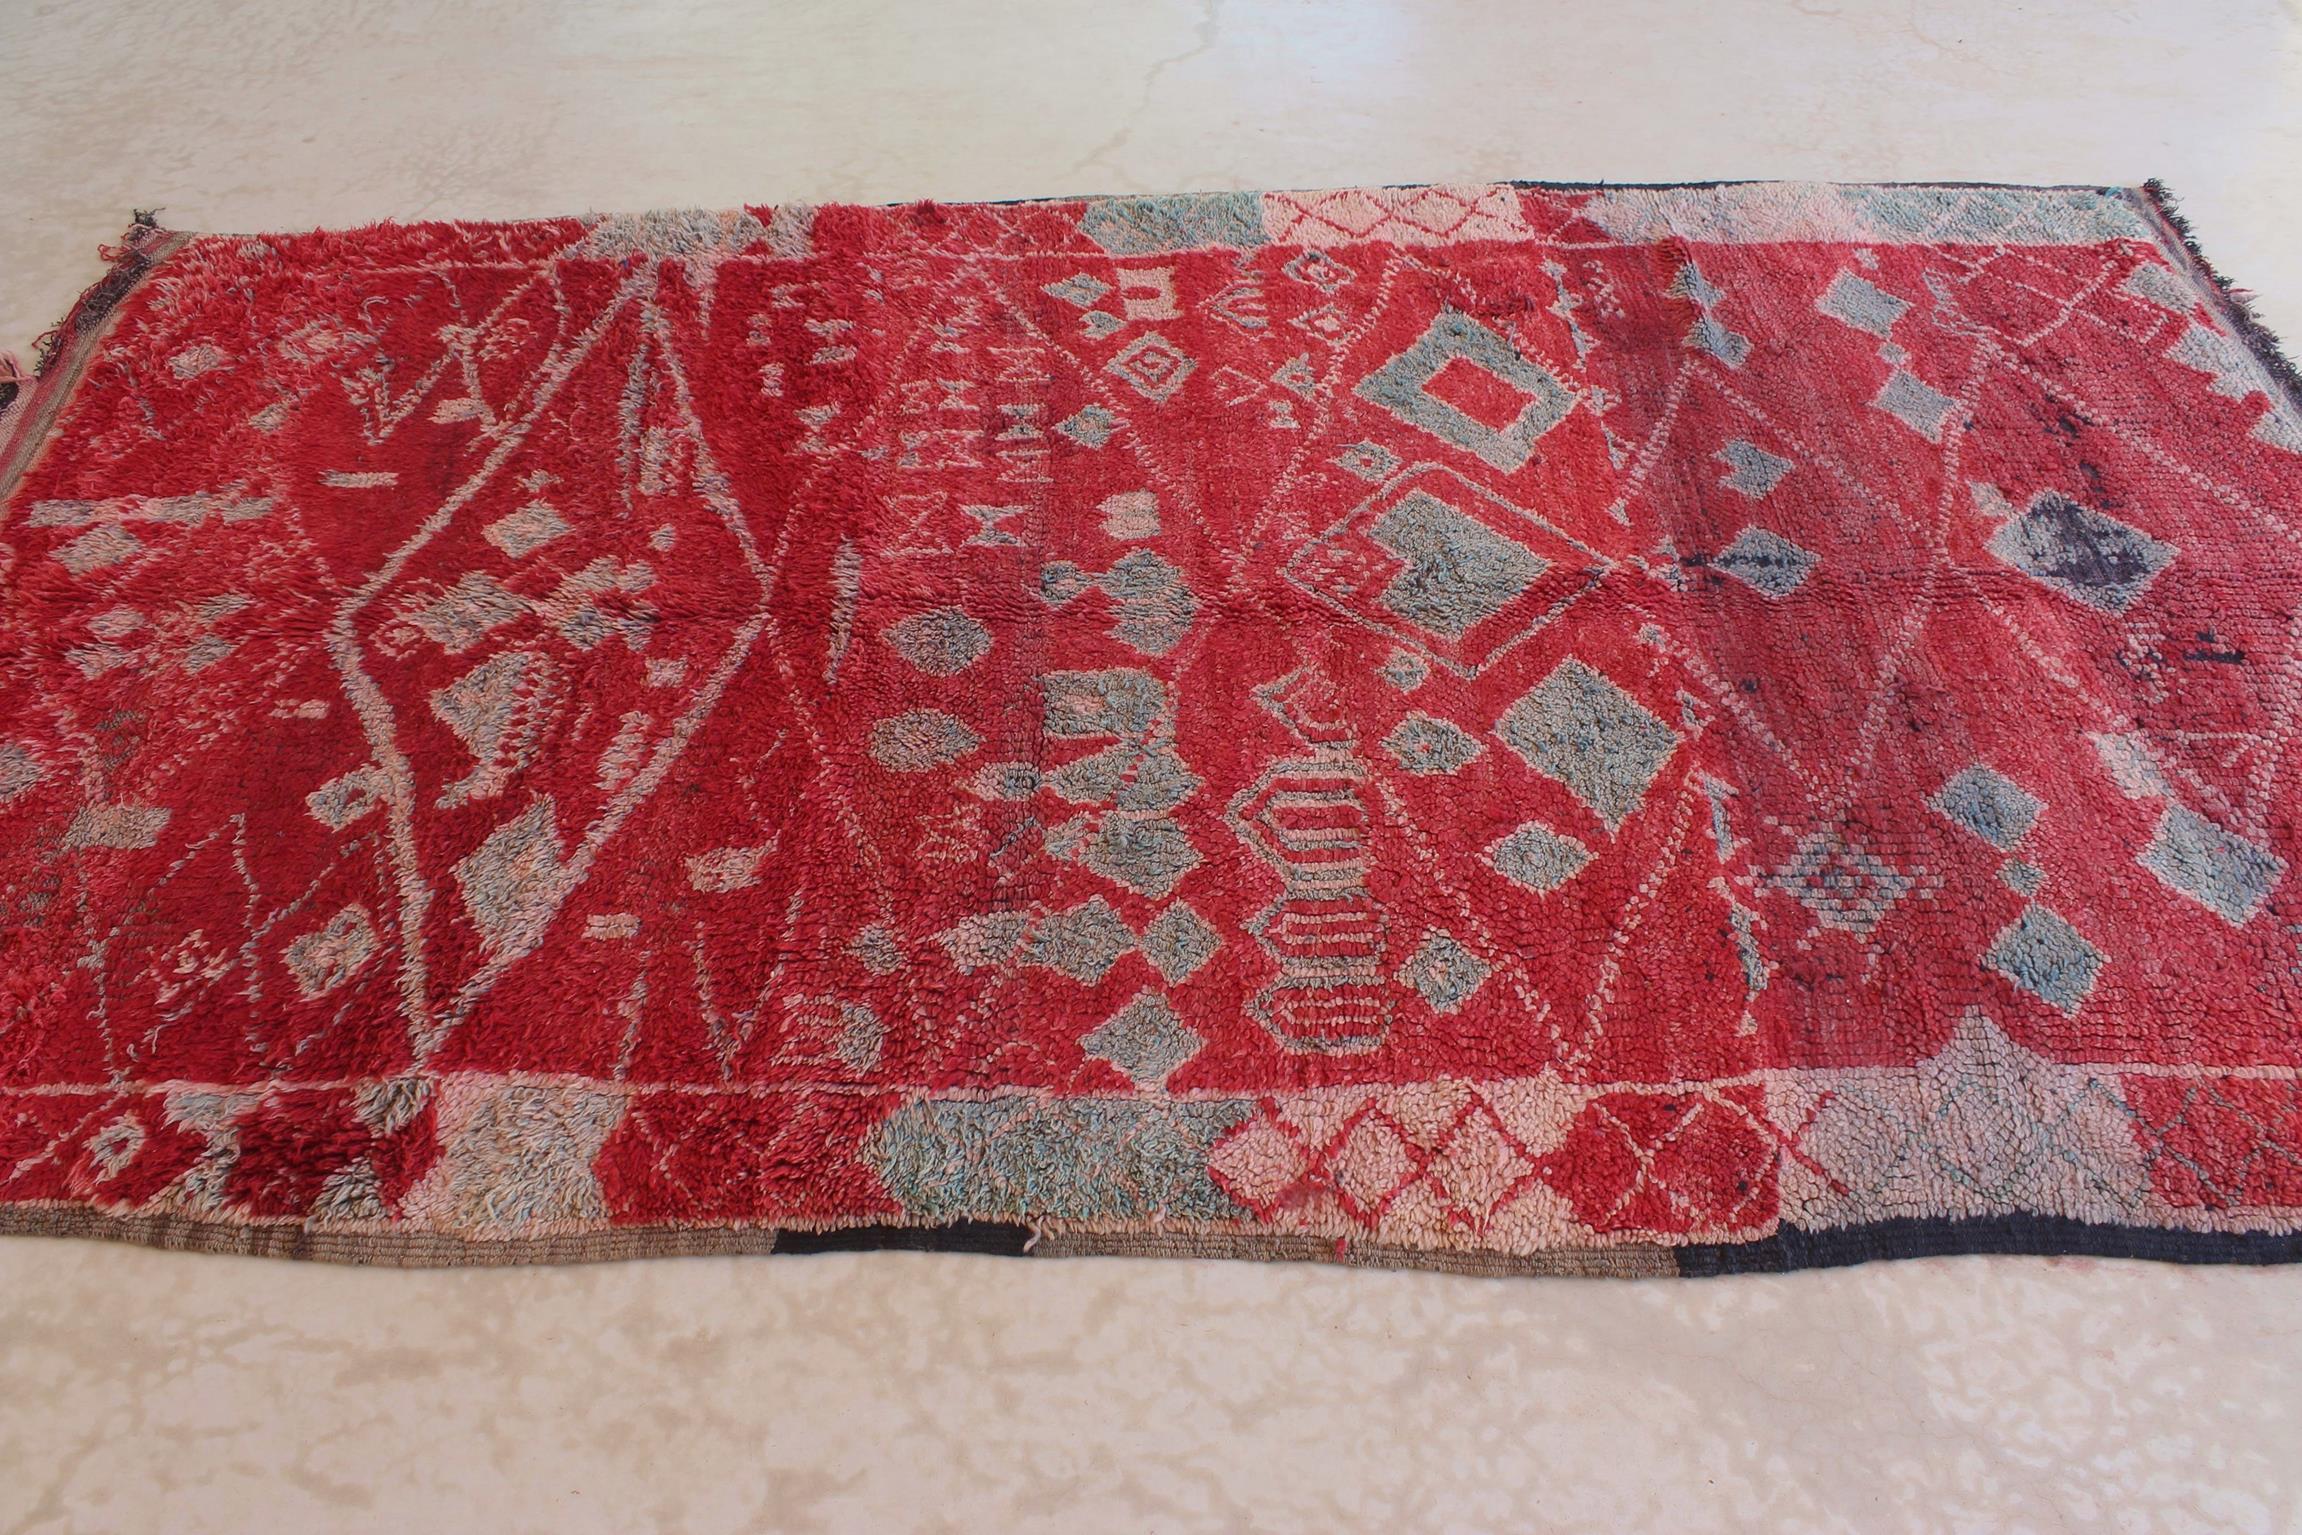 Tribal Vintage Moroccan Zayane rug - Red/green - 7x12feet / 213x365cm For Sale